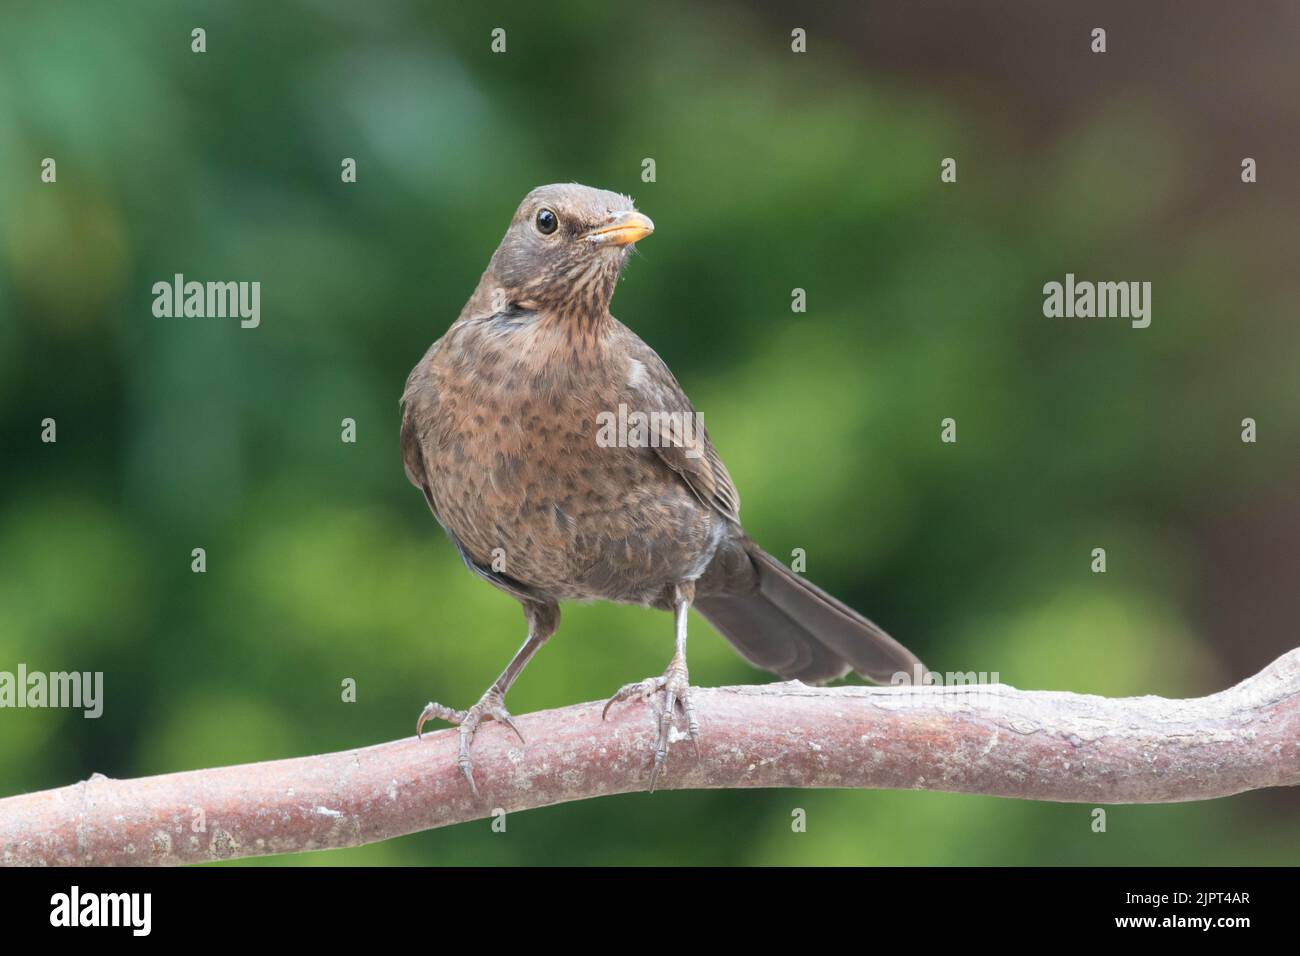 A female blackbird perched.  Taken in summer.  At Monmouthshire, Wales, Uk. Stock Photo